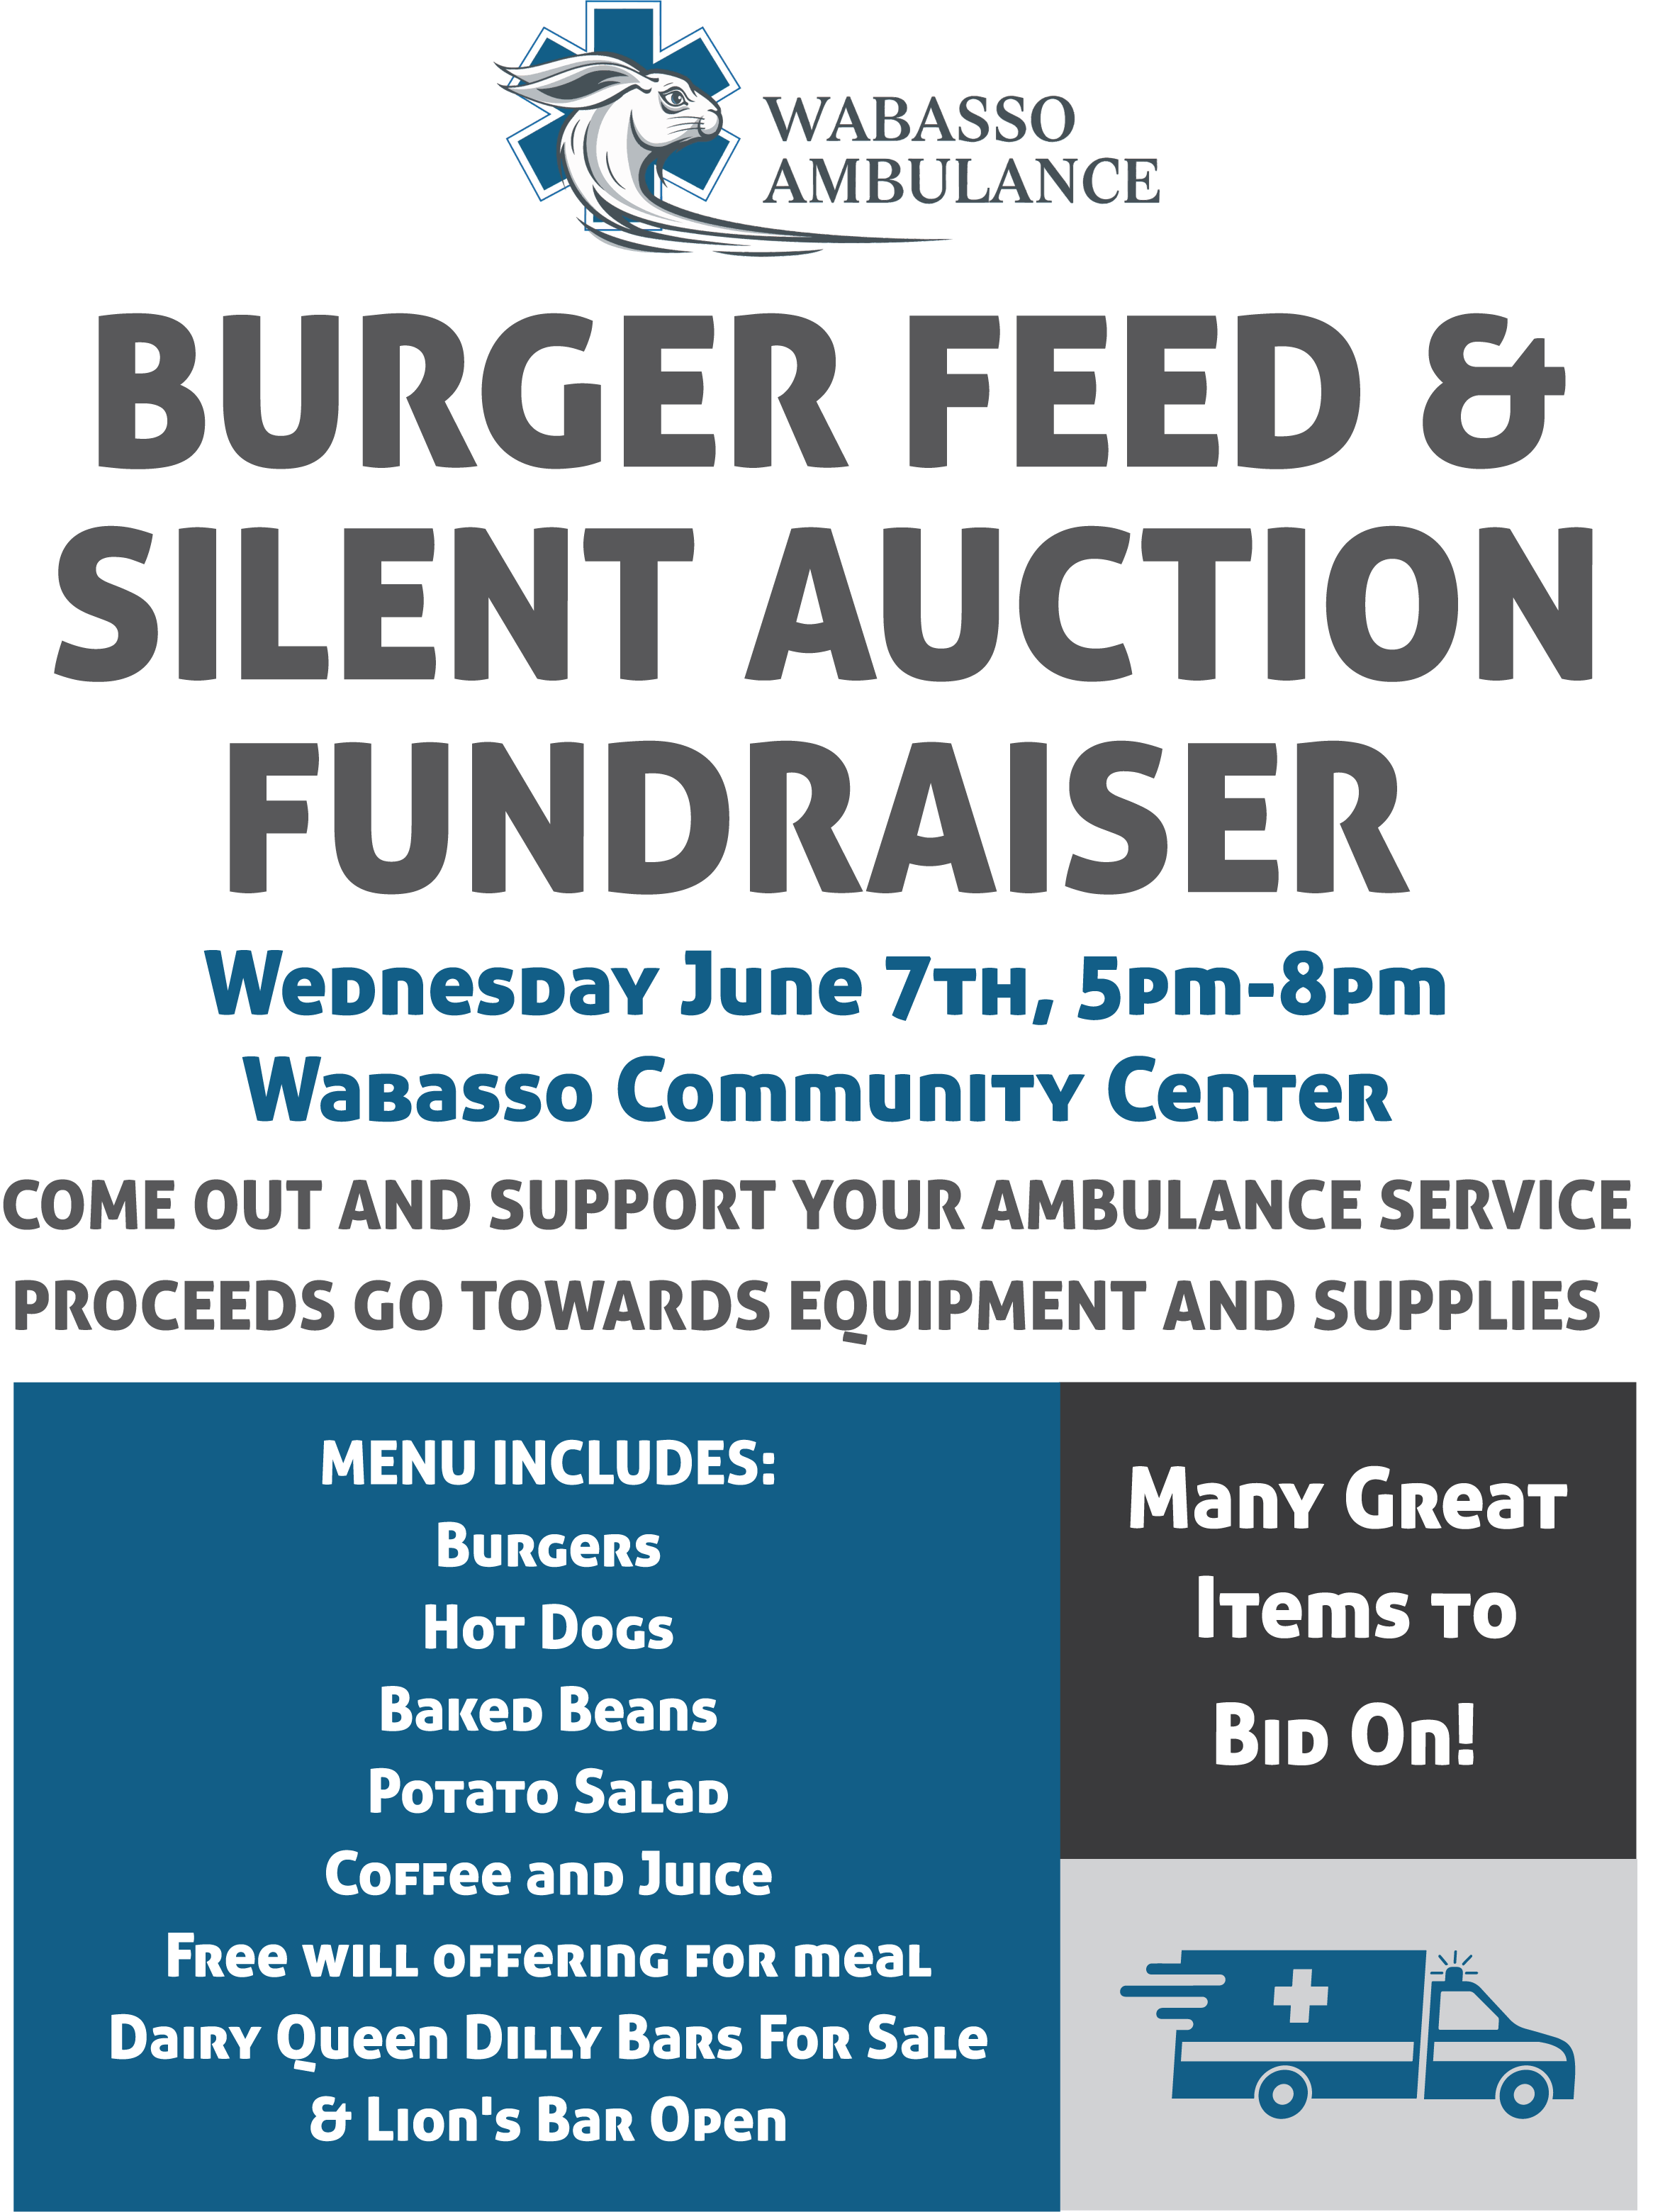 <h1 class="tribe-events-single-event-title">Wabasso Ambulance Burger Feed & Silent Auction</h1>